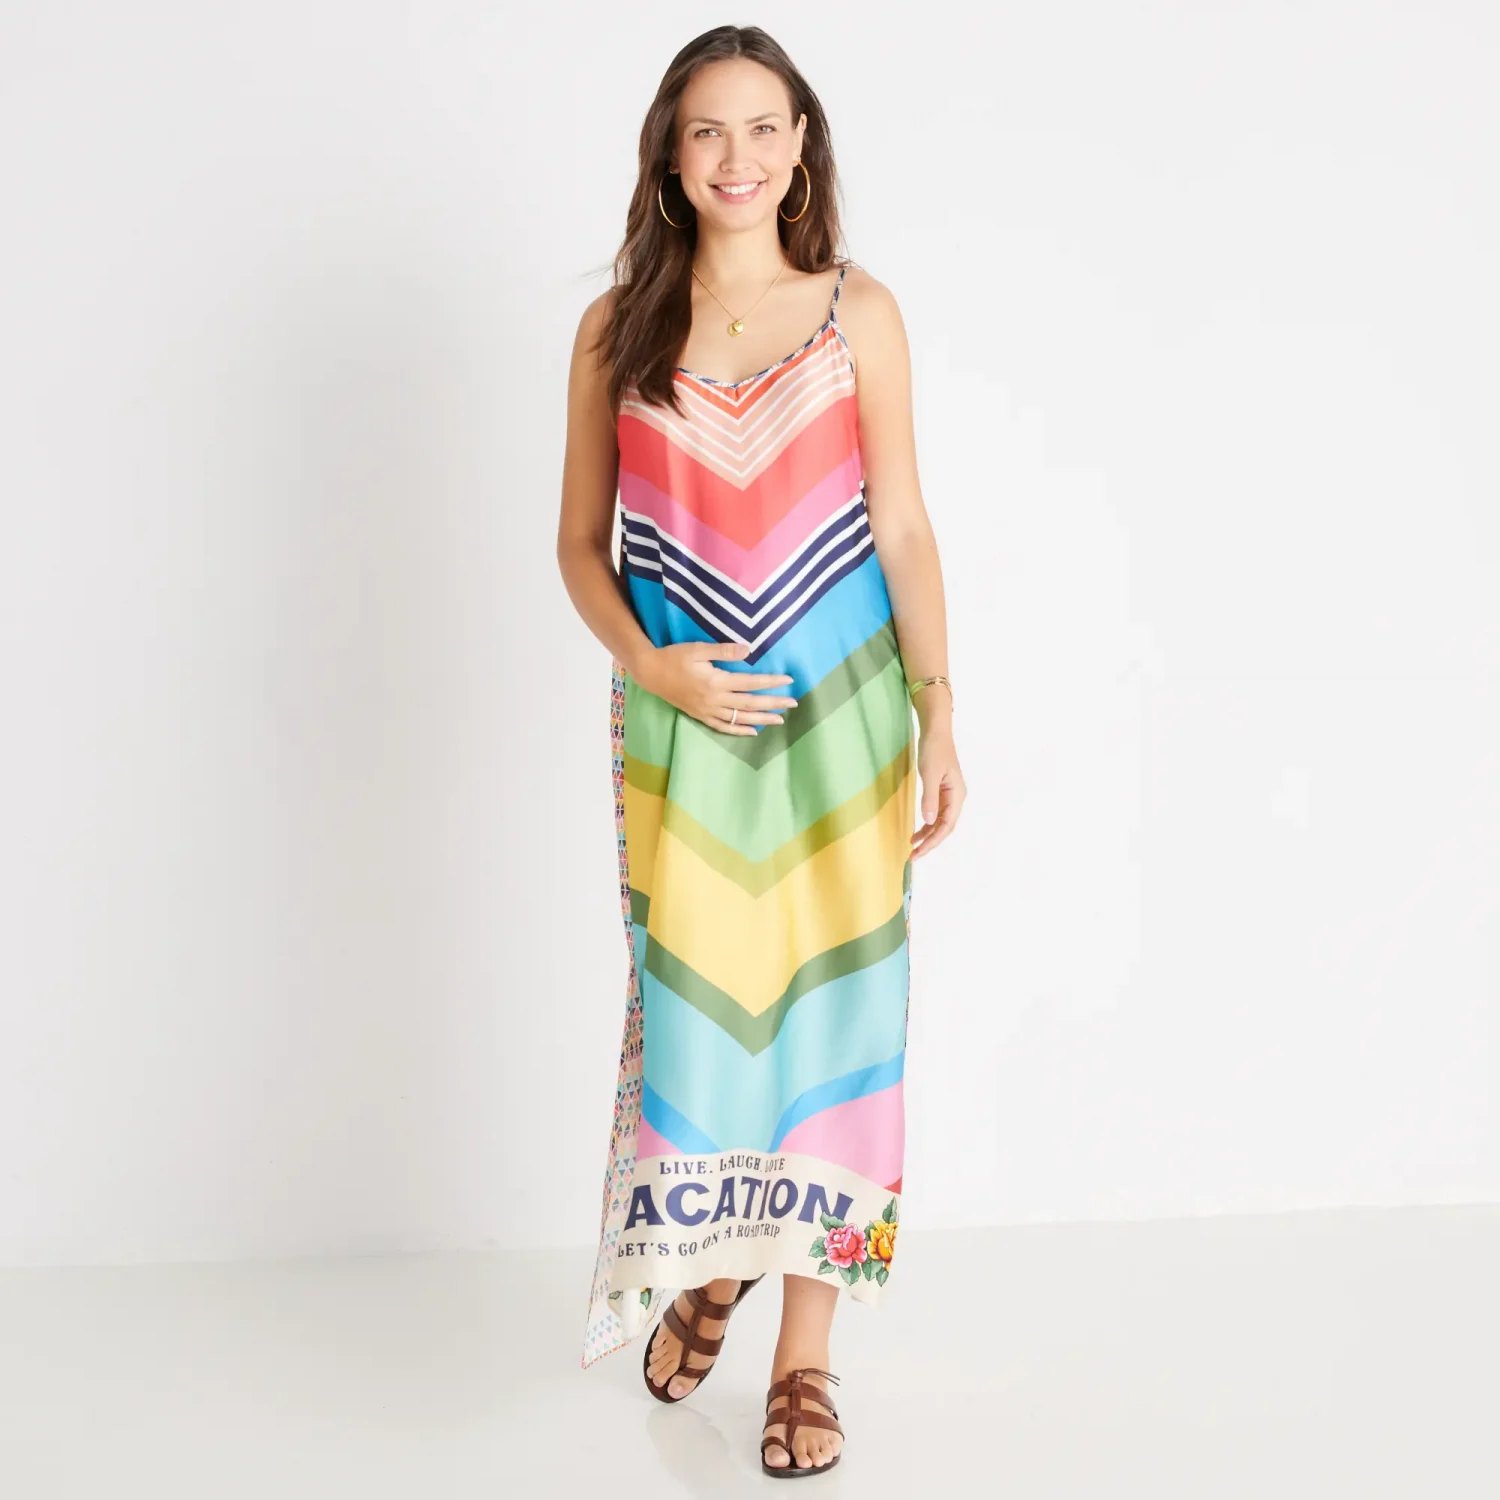 Me369 brand contemporary and stylish maternity friendly printed slip maxi dresses